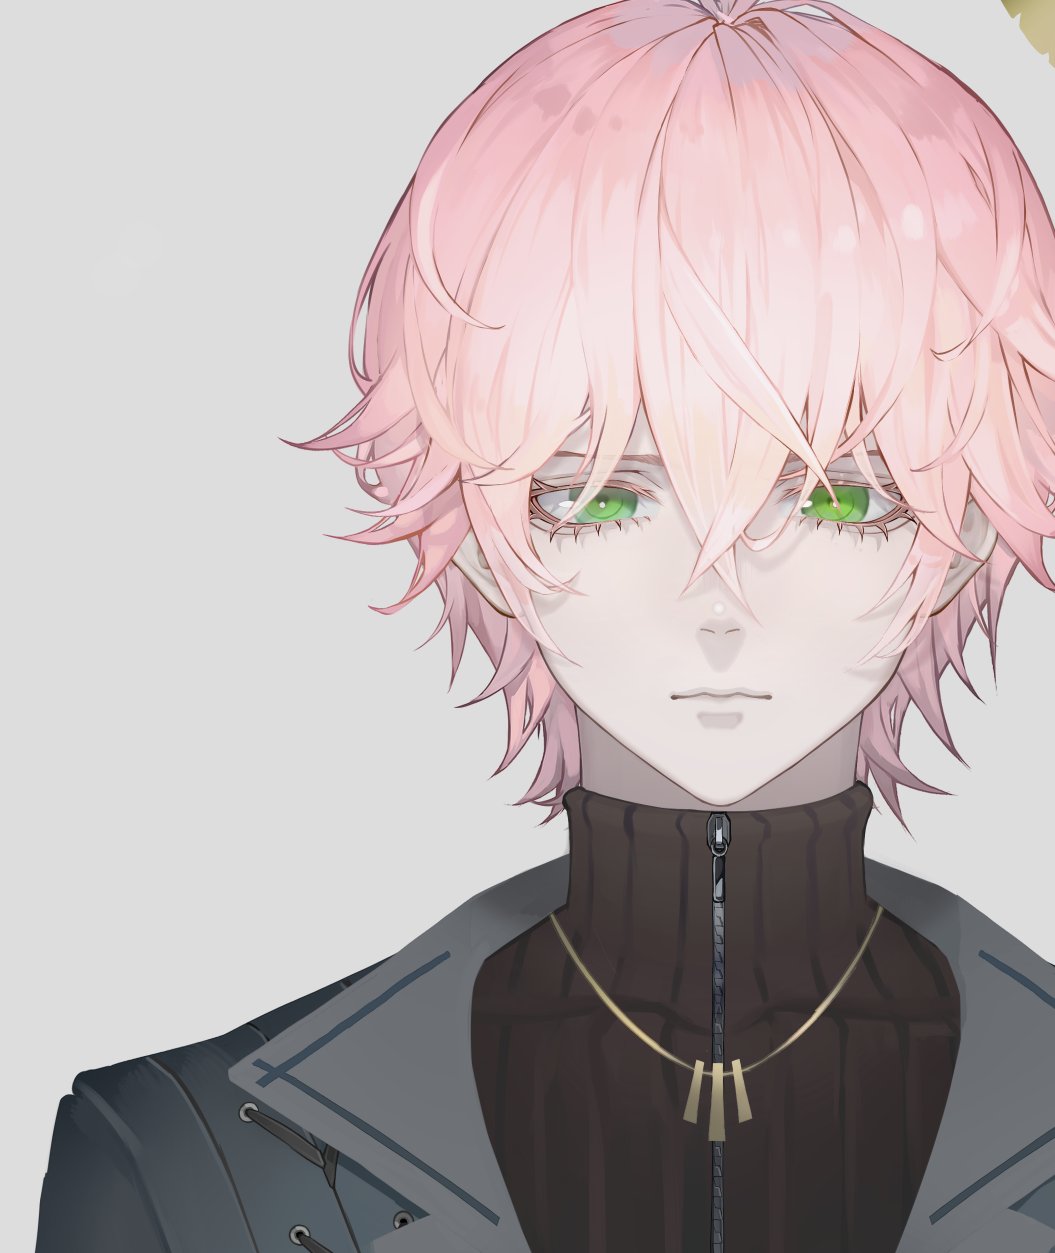 AI Image Generator: Anime boy with light pink fluffy hair and large green  eyes smiling and blushing